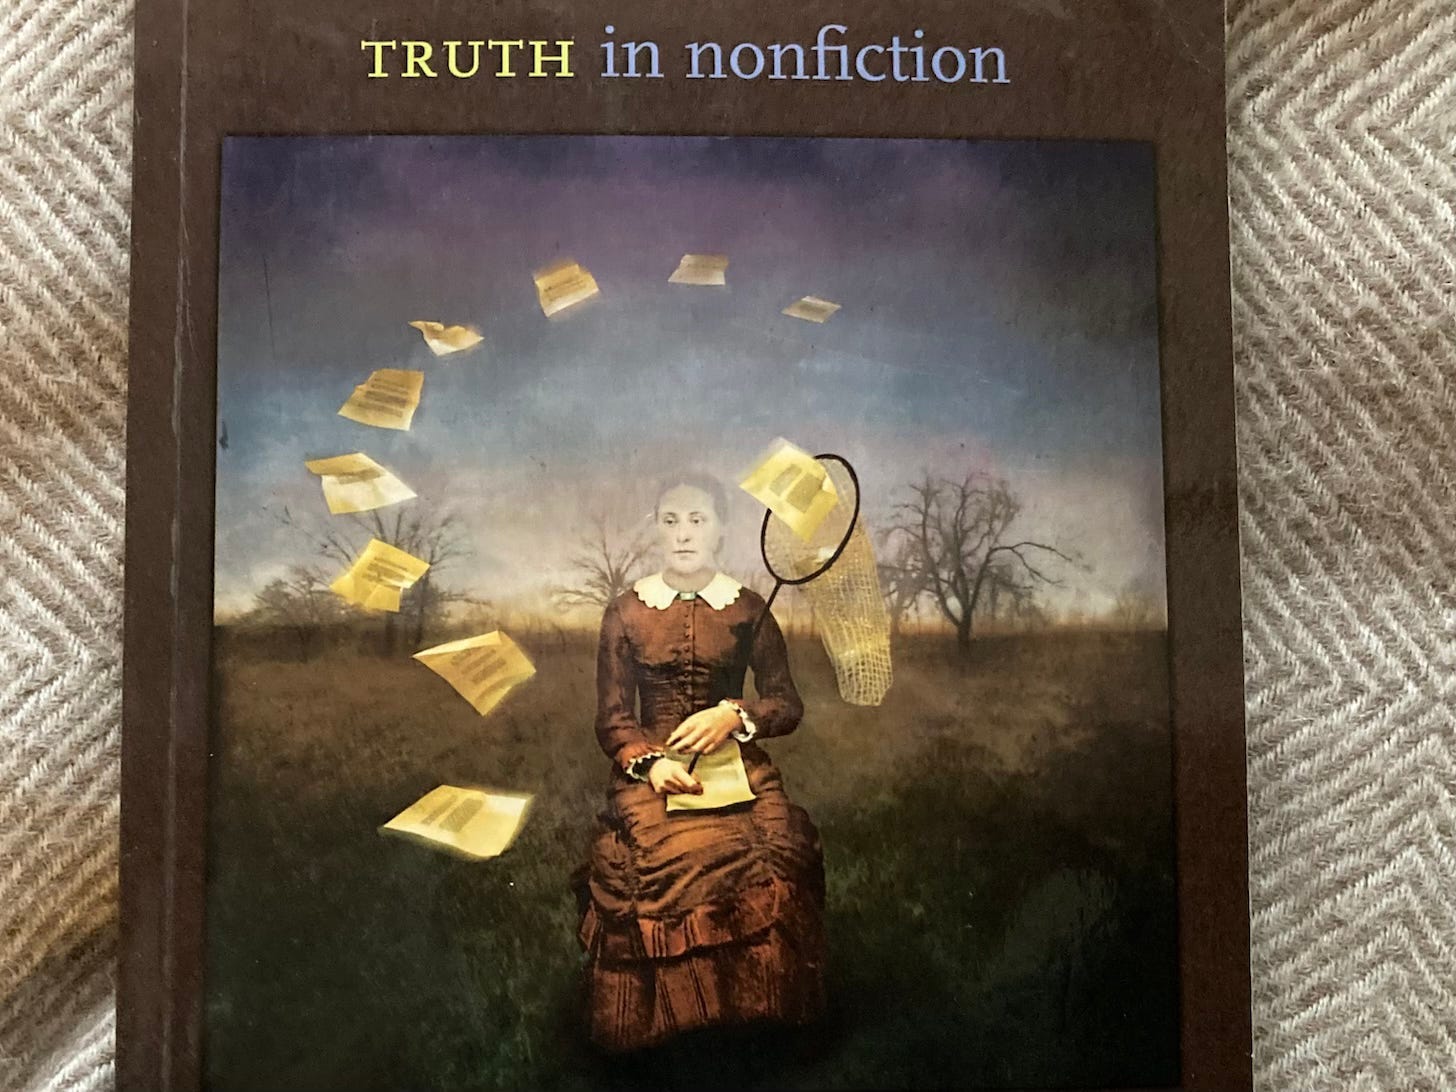 An image of a book with the title Truth in Nonfiction